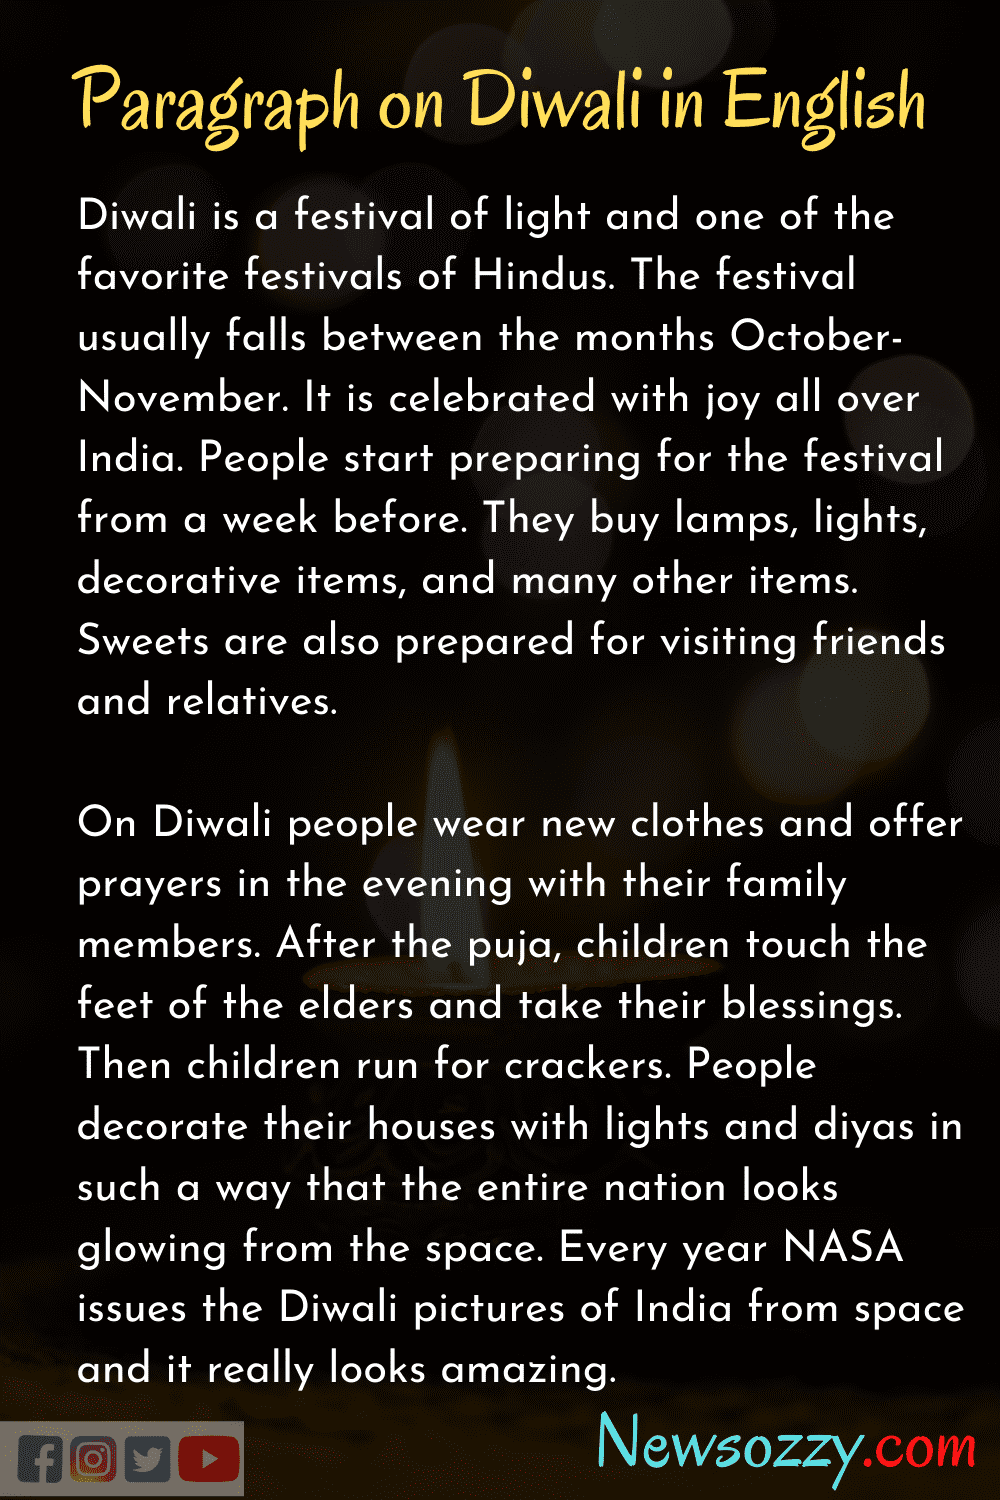 paragraph on Diwali in English for students